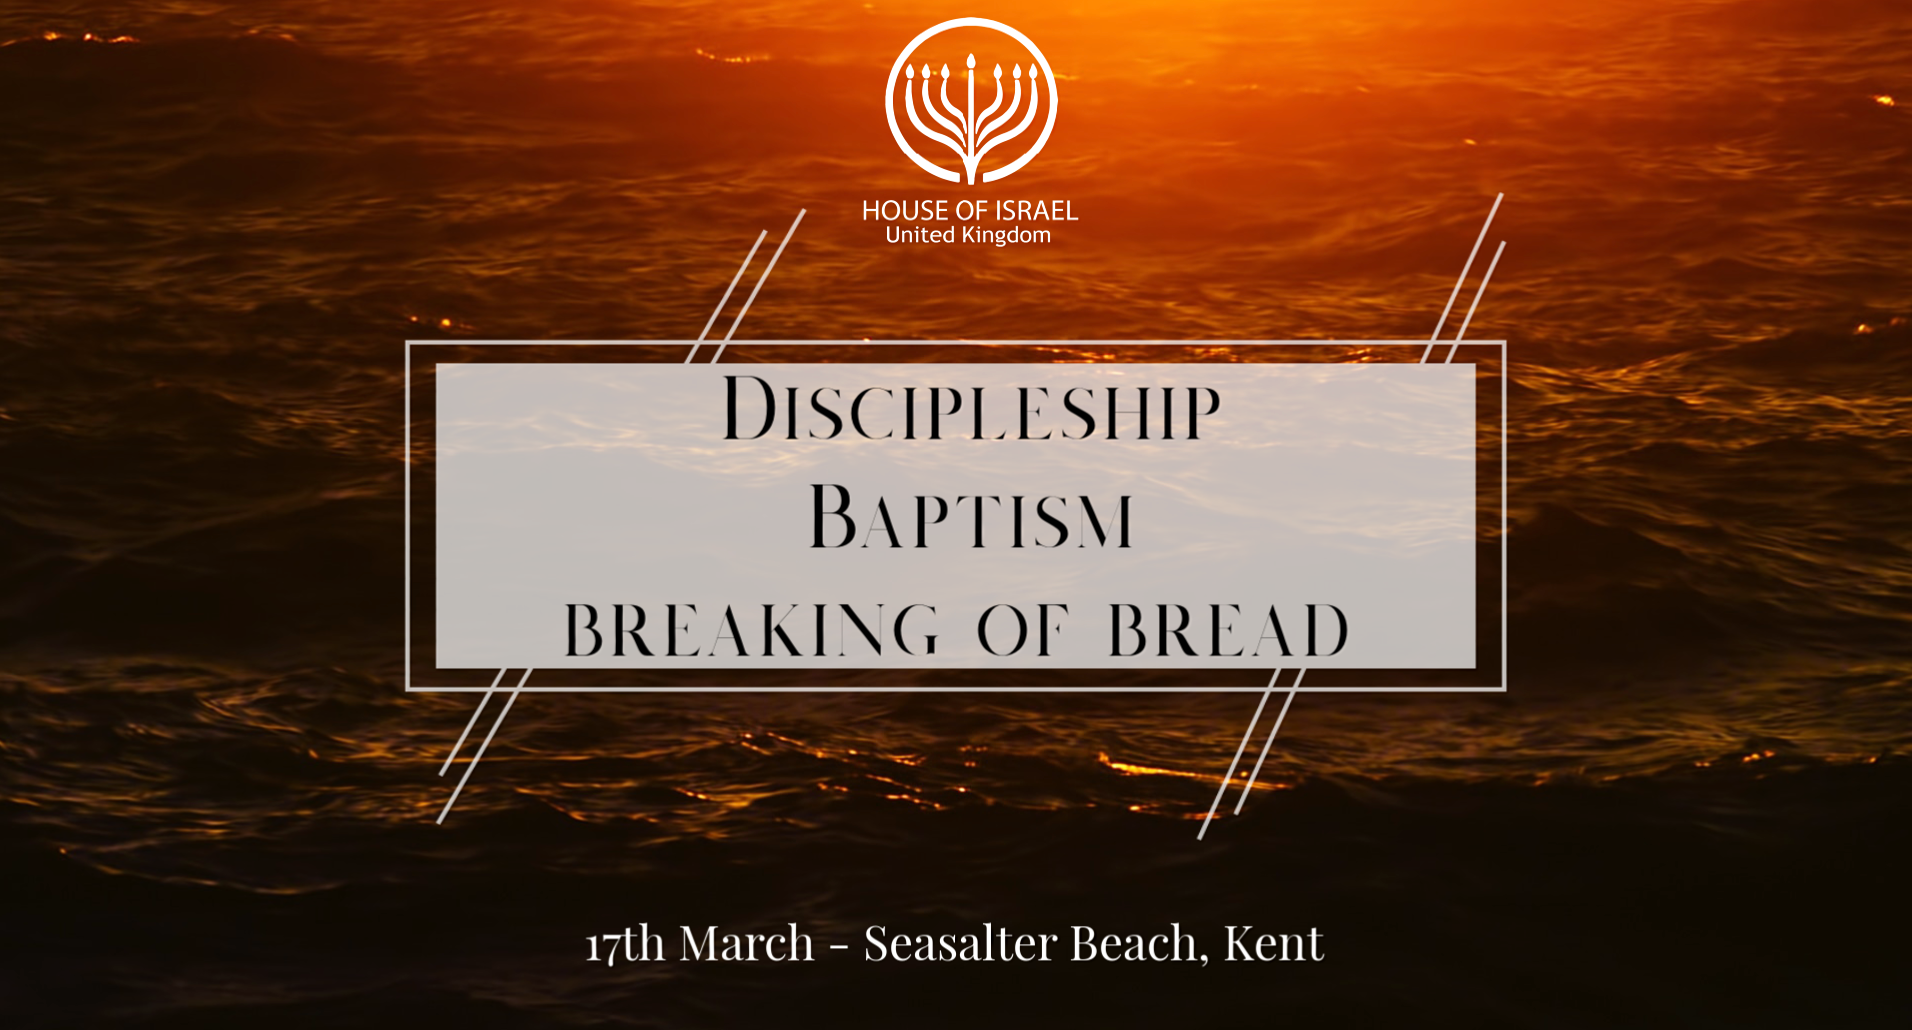 Further Information: 'Discipleship, Baptism & Breaking of Bread